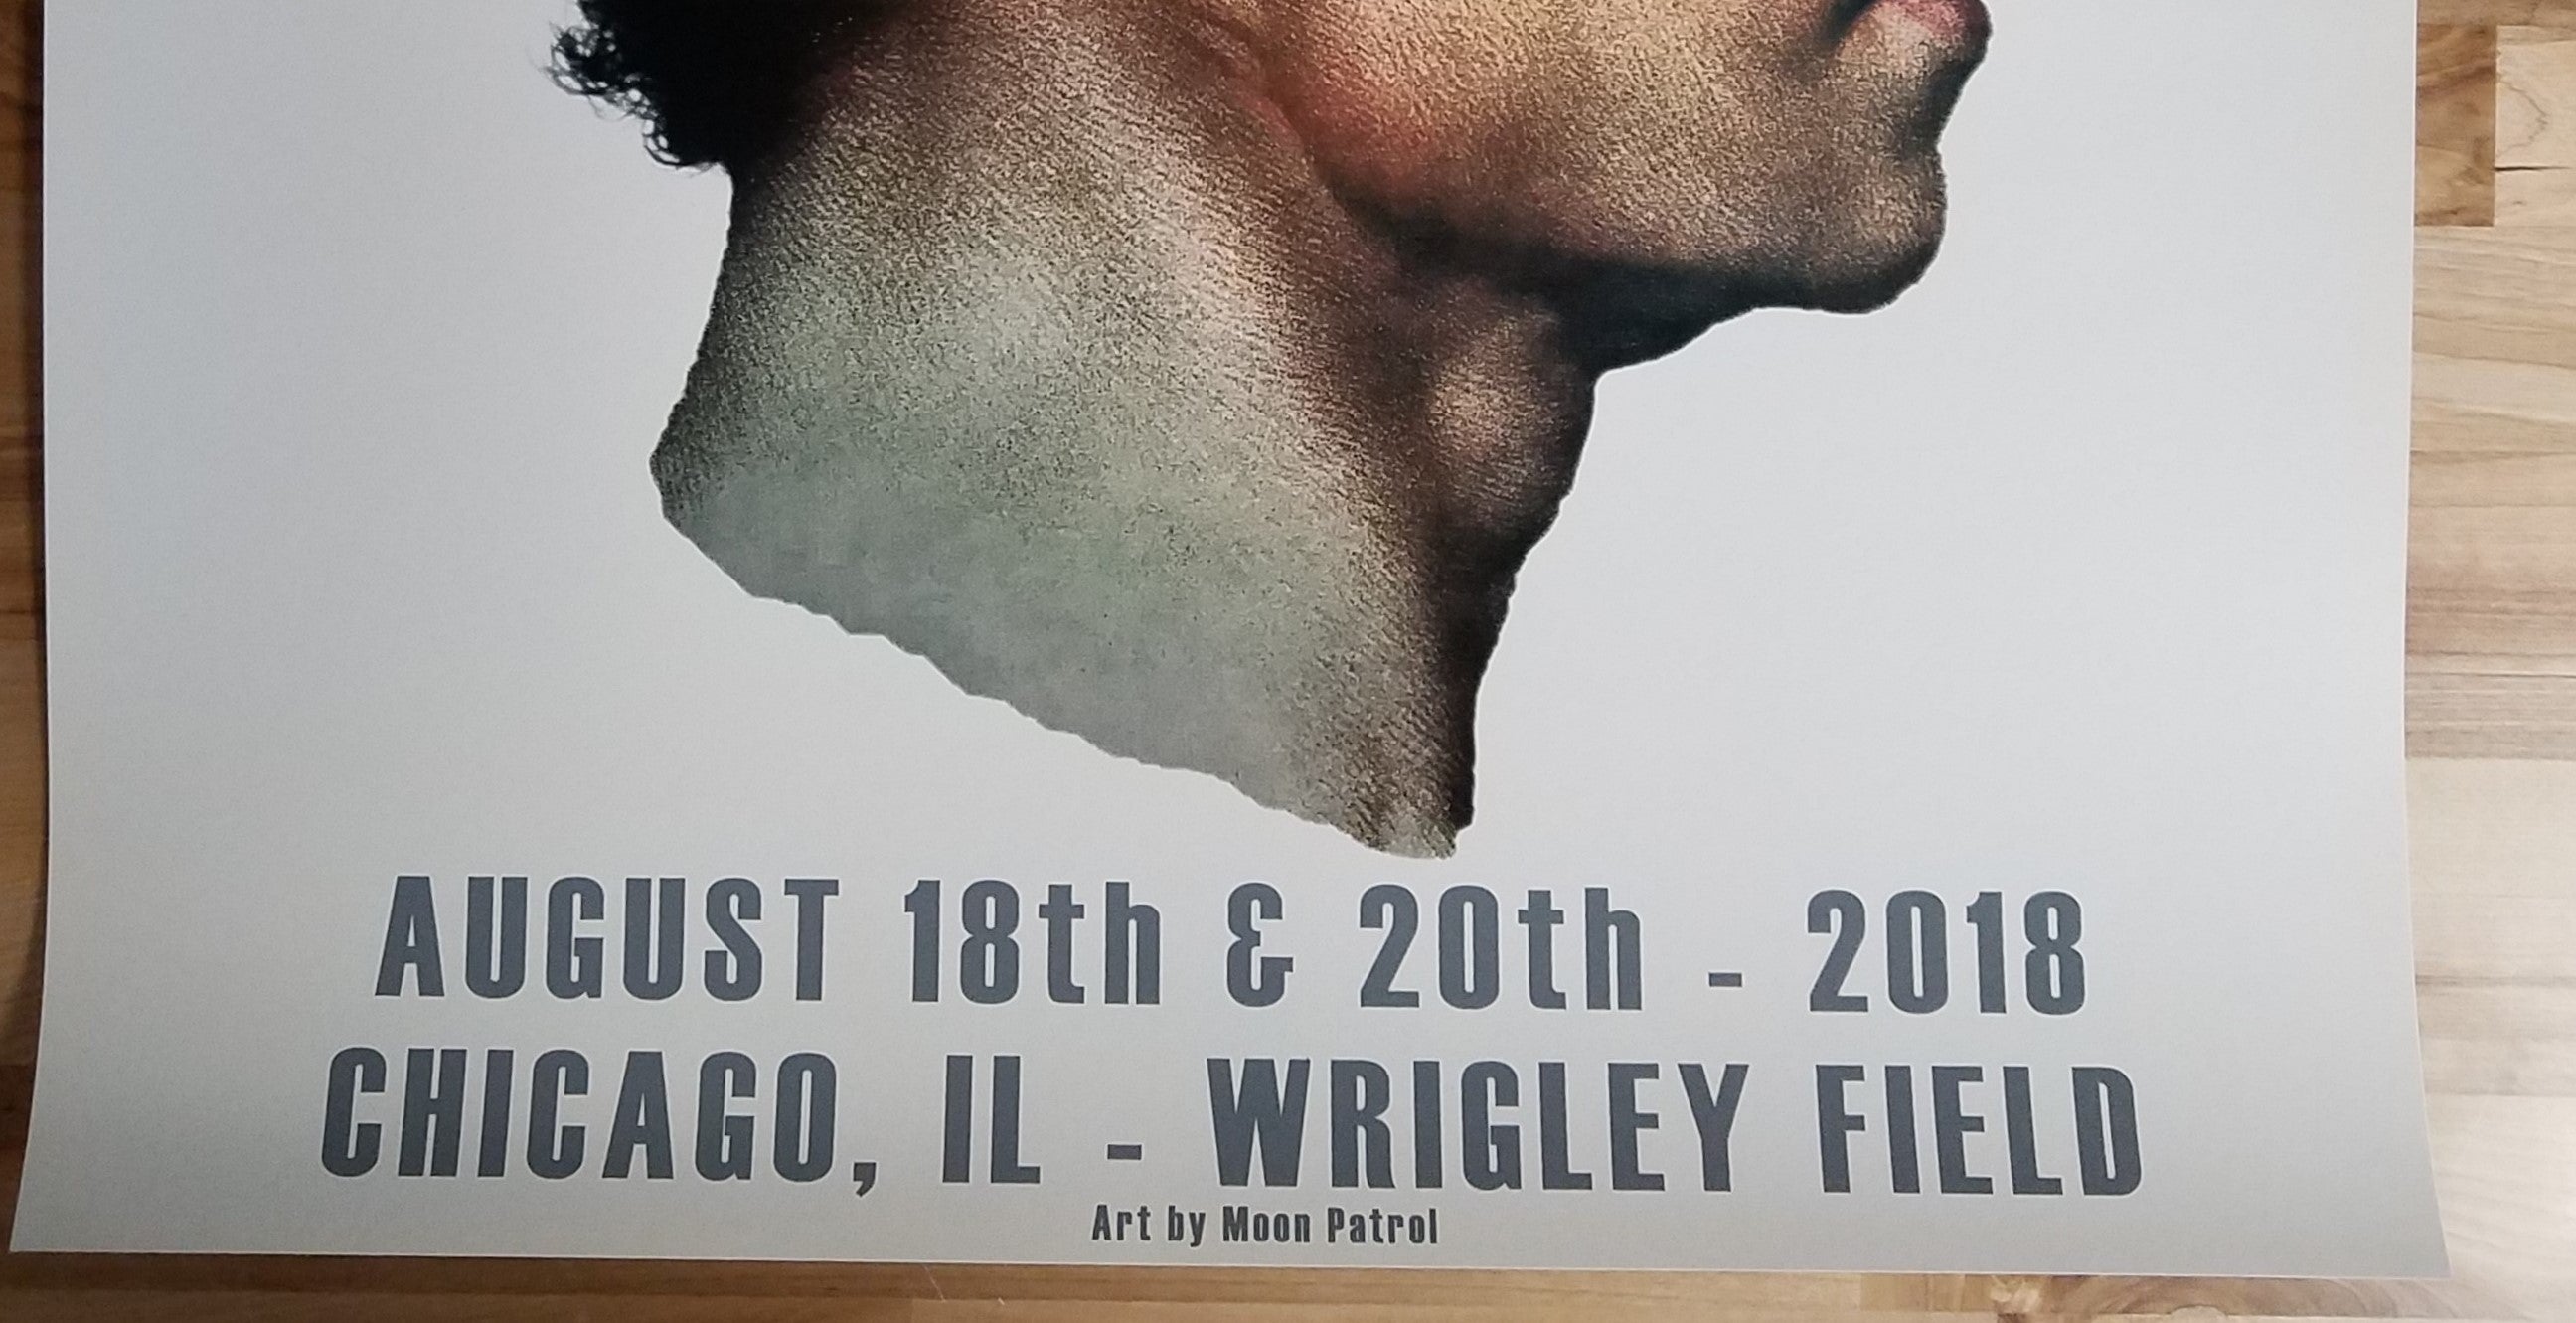 Title: Pearl Jam Matt Cunningham Bros Wrigley 2018 Official Merch Tent Poster artist: Matthew Cunningham Edition: Type: Screen Print Size: 18" x 24" Location: Chicago, IL Venue: Wrigley Field Notes: Very good condition  Created for the two Wrigley Field shows taking place on August 18th & August 20th, 2018.  Unsigned and Unnumbered - released on August 16, 2018 at the Wrigley Field Merch Tent across the street from the field.